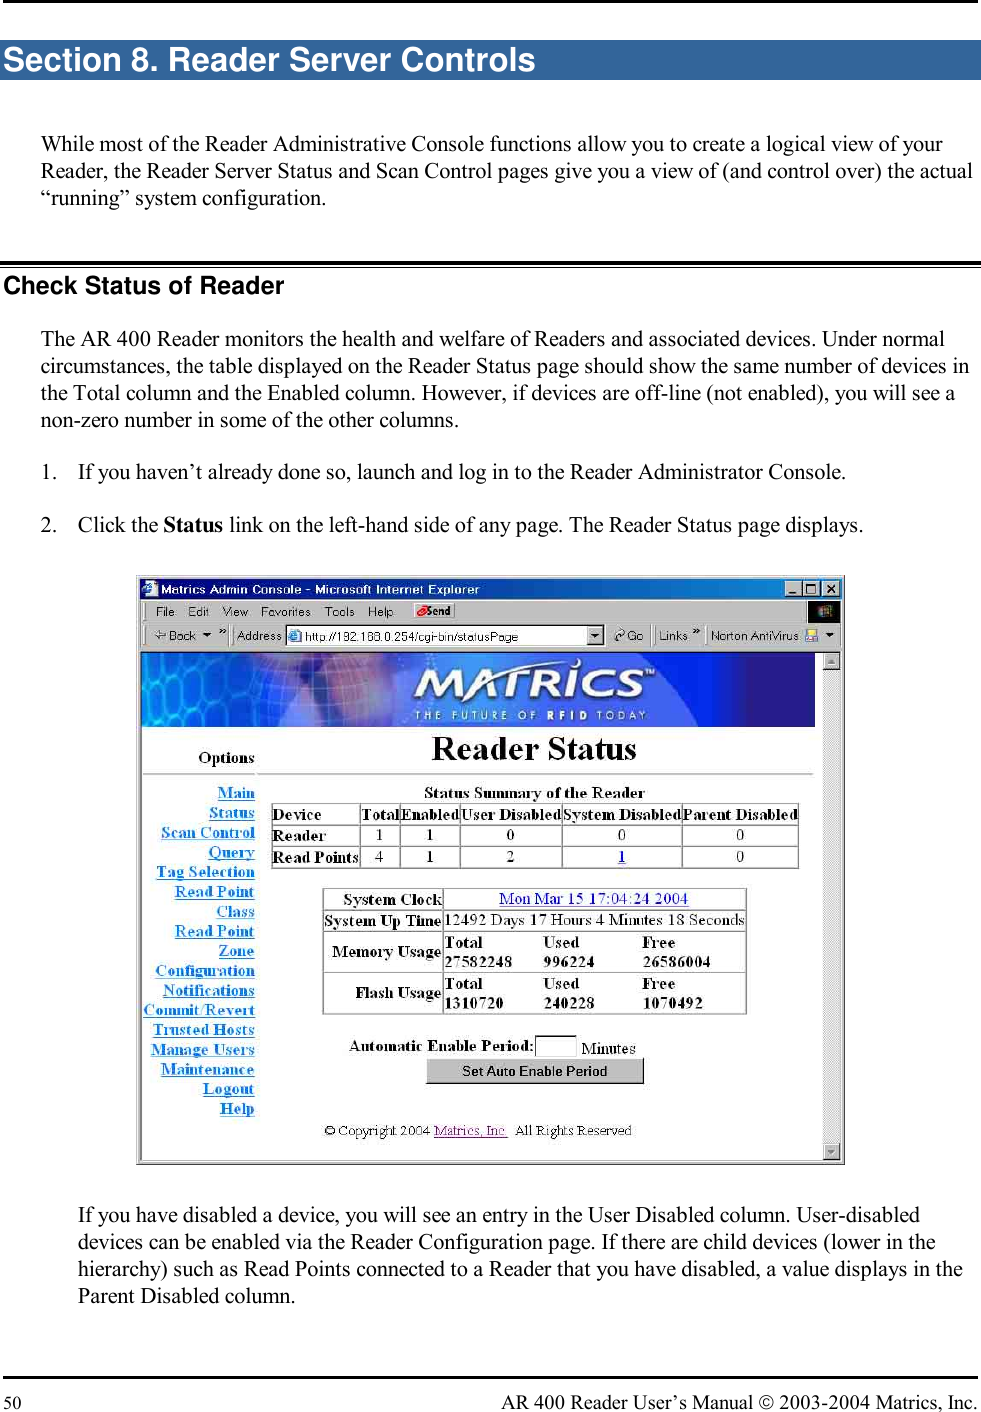  50  AR 400 Reader User’s Manual  2003-2004 Matrics, Inc. Section 8. Reader Server Controls While most of the Reader Administrative Console functions allow you to create a logical view of your Reader, the Reader Server Status and Scan Control pages give you a view of (and control over) the actual “running” system configuration.  Check Status of Reader The AR 400 Reader monitors the health and welfare of Readers and associated devices. Under normal circumstances, the table displayed on the Reader Status page should show the same number of devices in the Total column and the Enabled column. However, if devices are off-line (not enabled), you will see a non-zero number in some of the other columns. 1.  If you haven’t already done so, launch and log in to the Reader Administrator Console. 2. Click the Status link on the left-hand side of any page. The Reader Status page displays.  If you have disabled a device, you will see an entry in the User Disabled column. User-disabled devices can be enabled via the Reader Configuration page. If there are child devices (lower in the hierarchy) such as Read Points connected to a Reader that you have disabled, a value displays in the Parent Disabled column. 